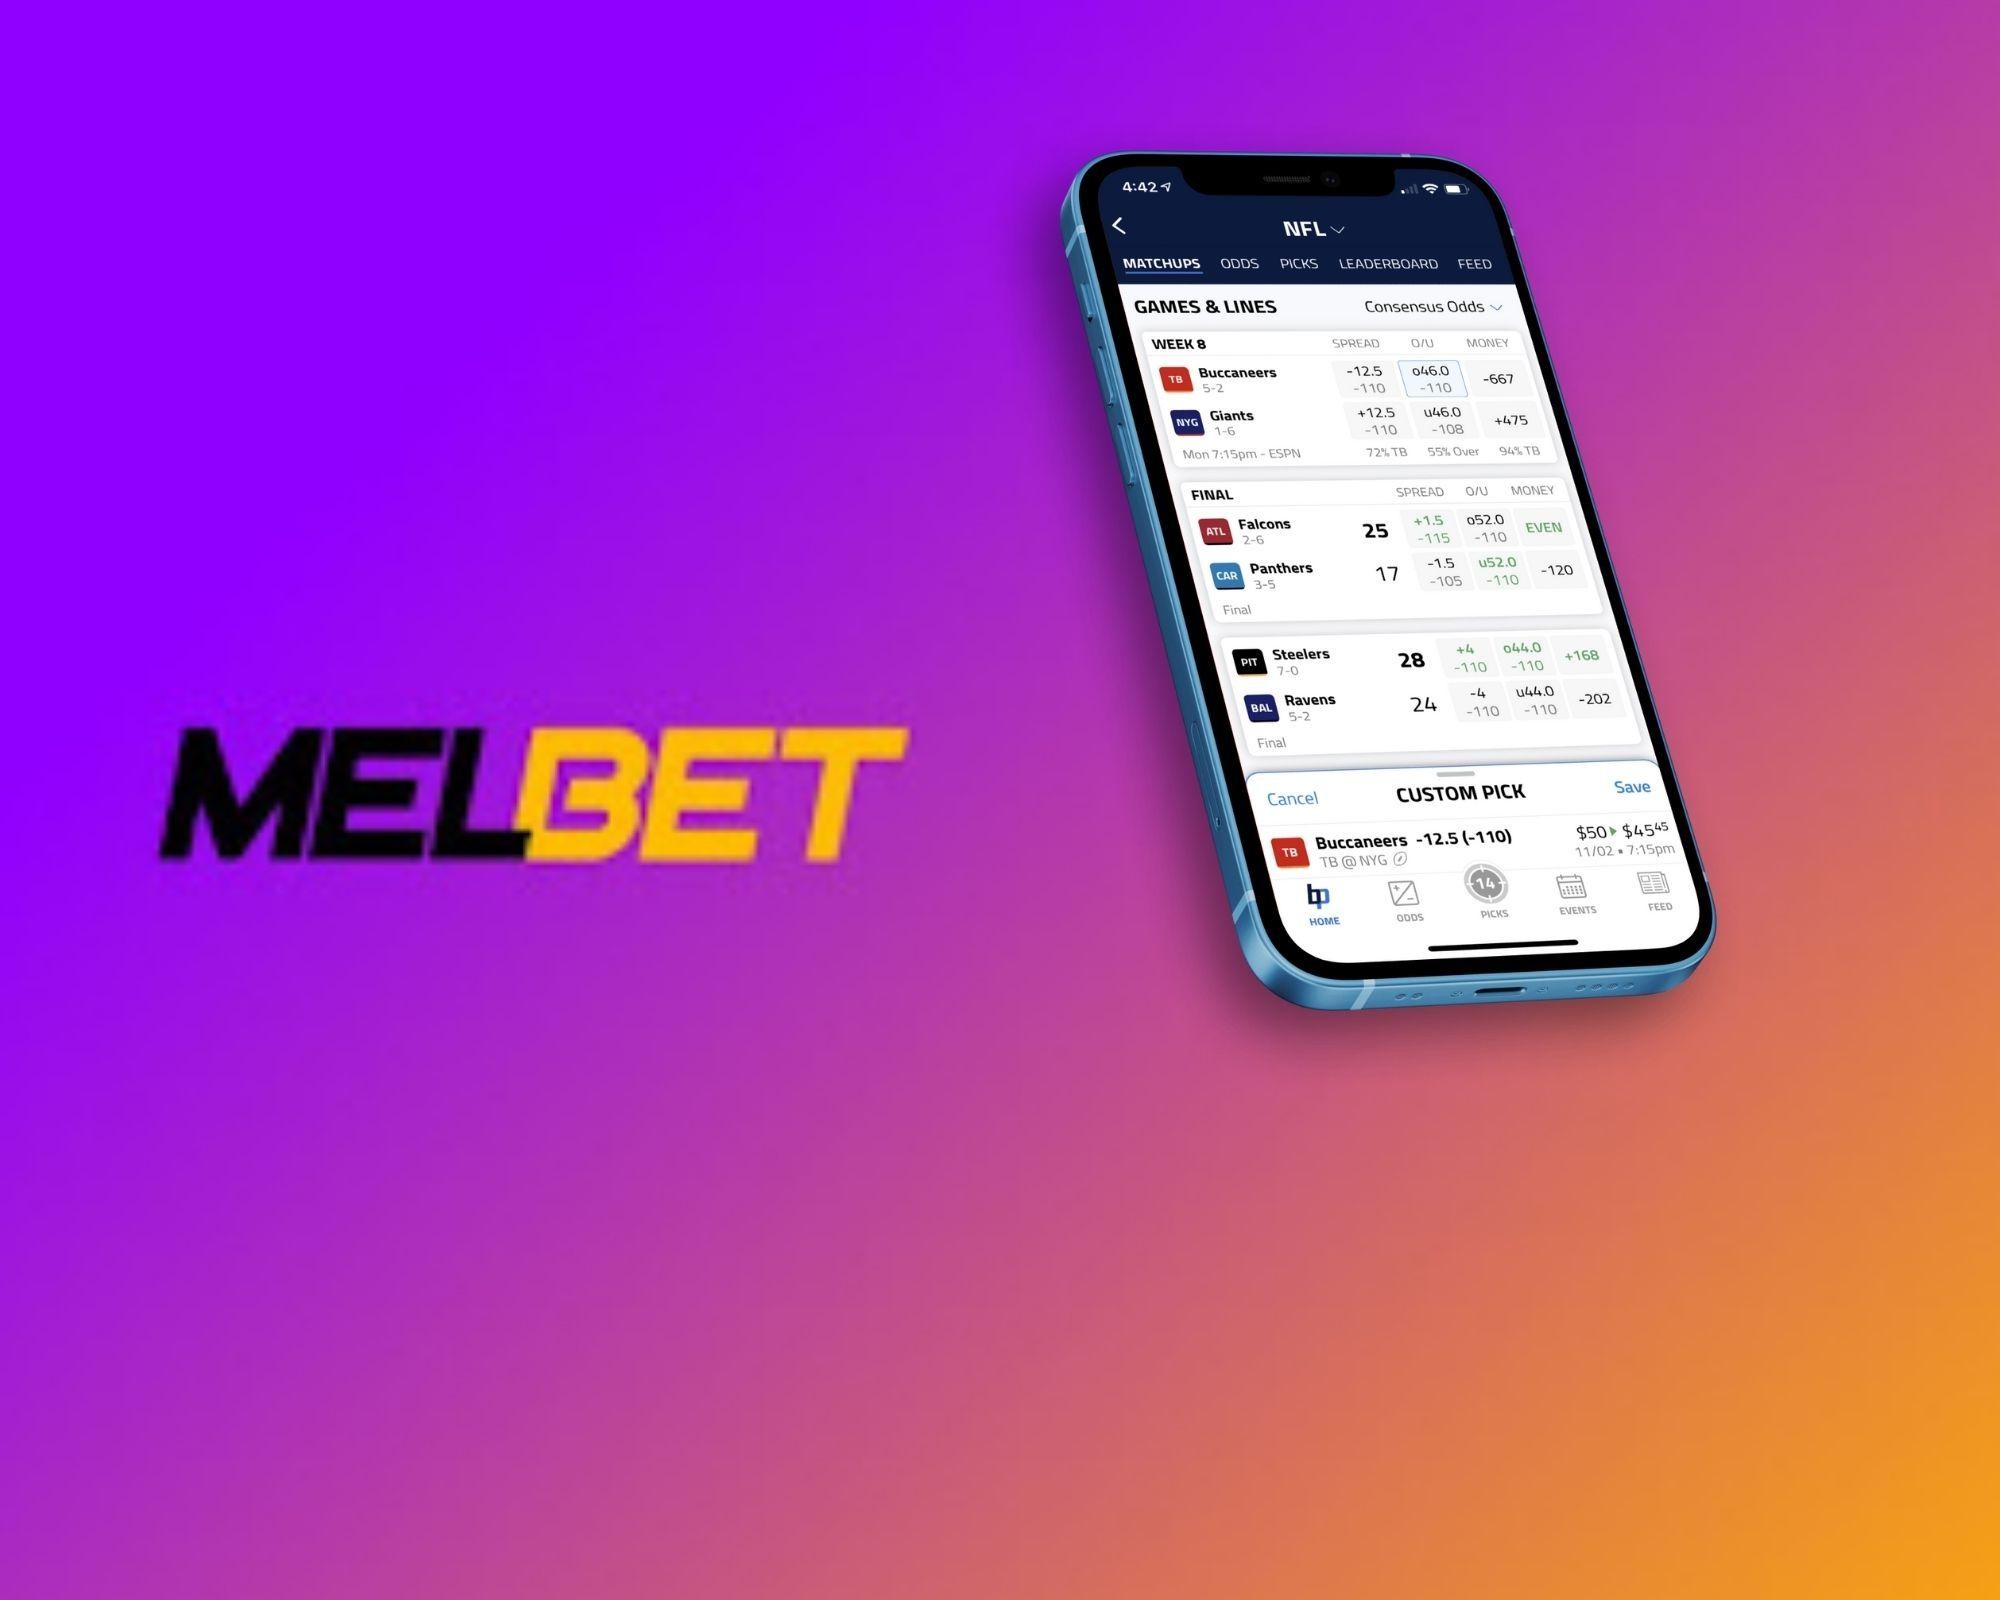 How Do I Download The Melbet App To My Mobile Device